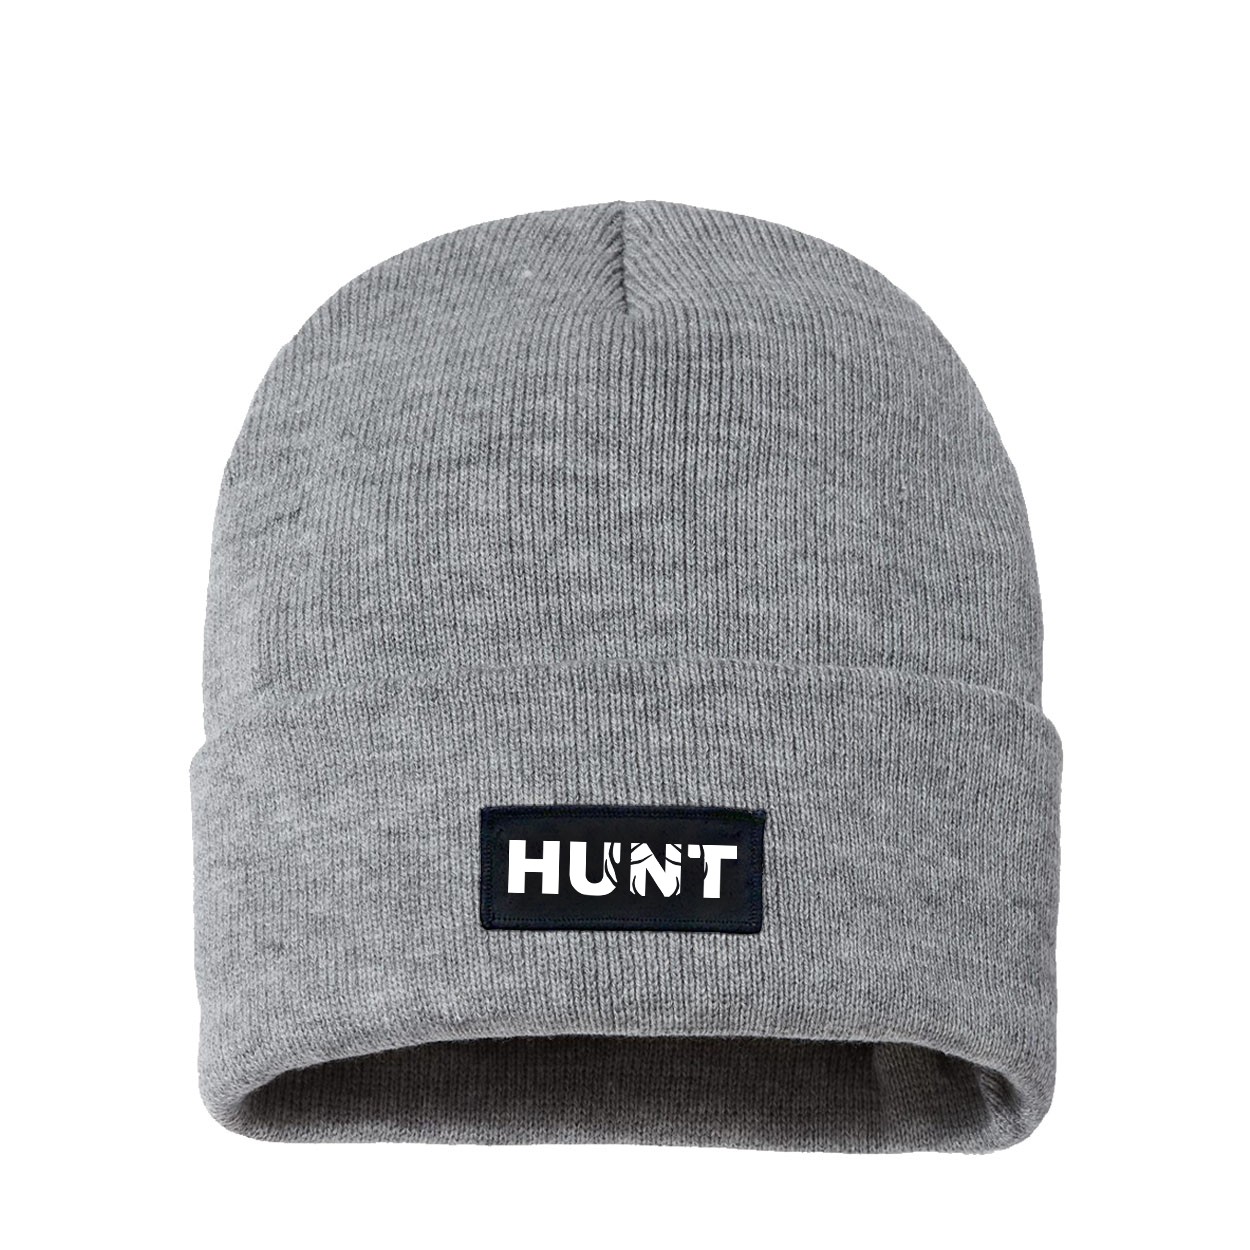 Hunt Rack Logo Night Out Woven Patch Night Out Sherpa Lined Cuffed Beanie Heather Gray (White Logo)